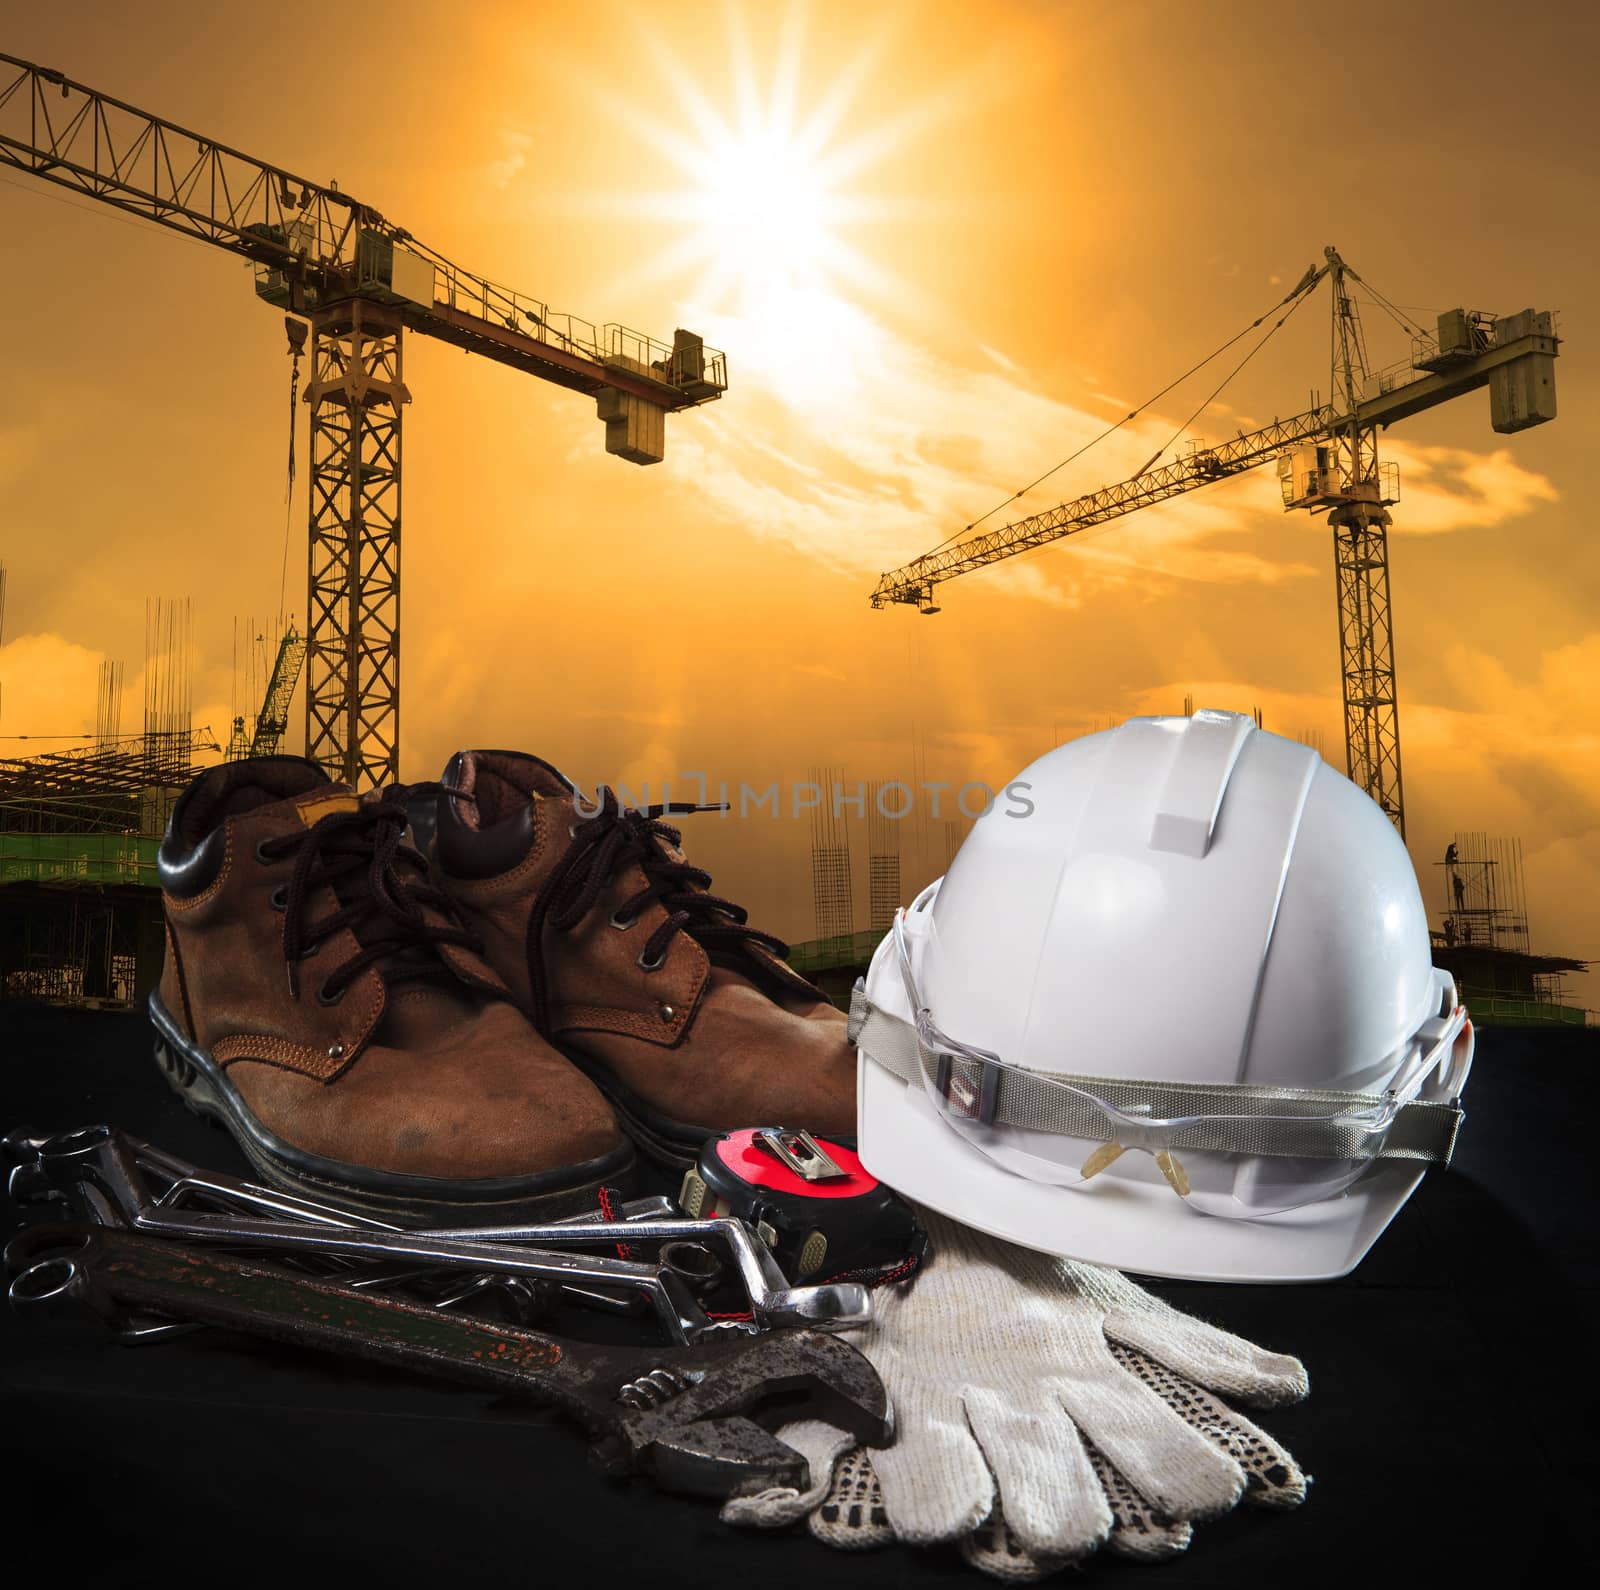 helmet and construction equipment with building and crane against dusky sky use for construction business theme